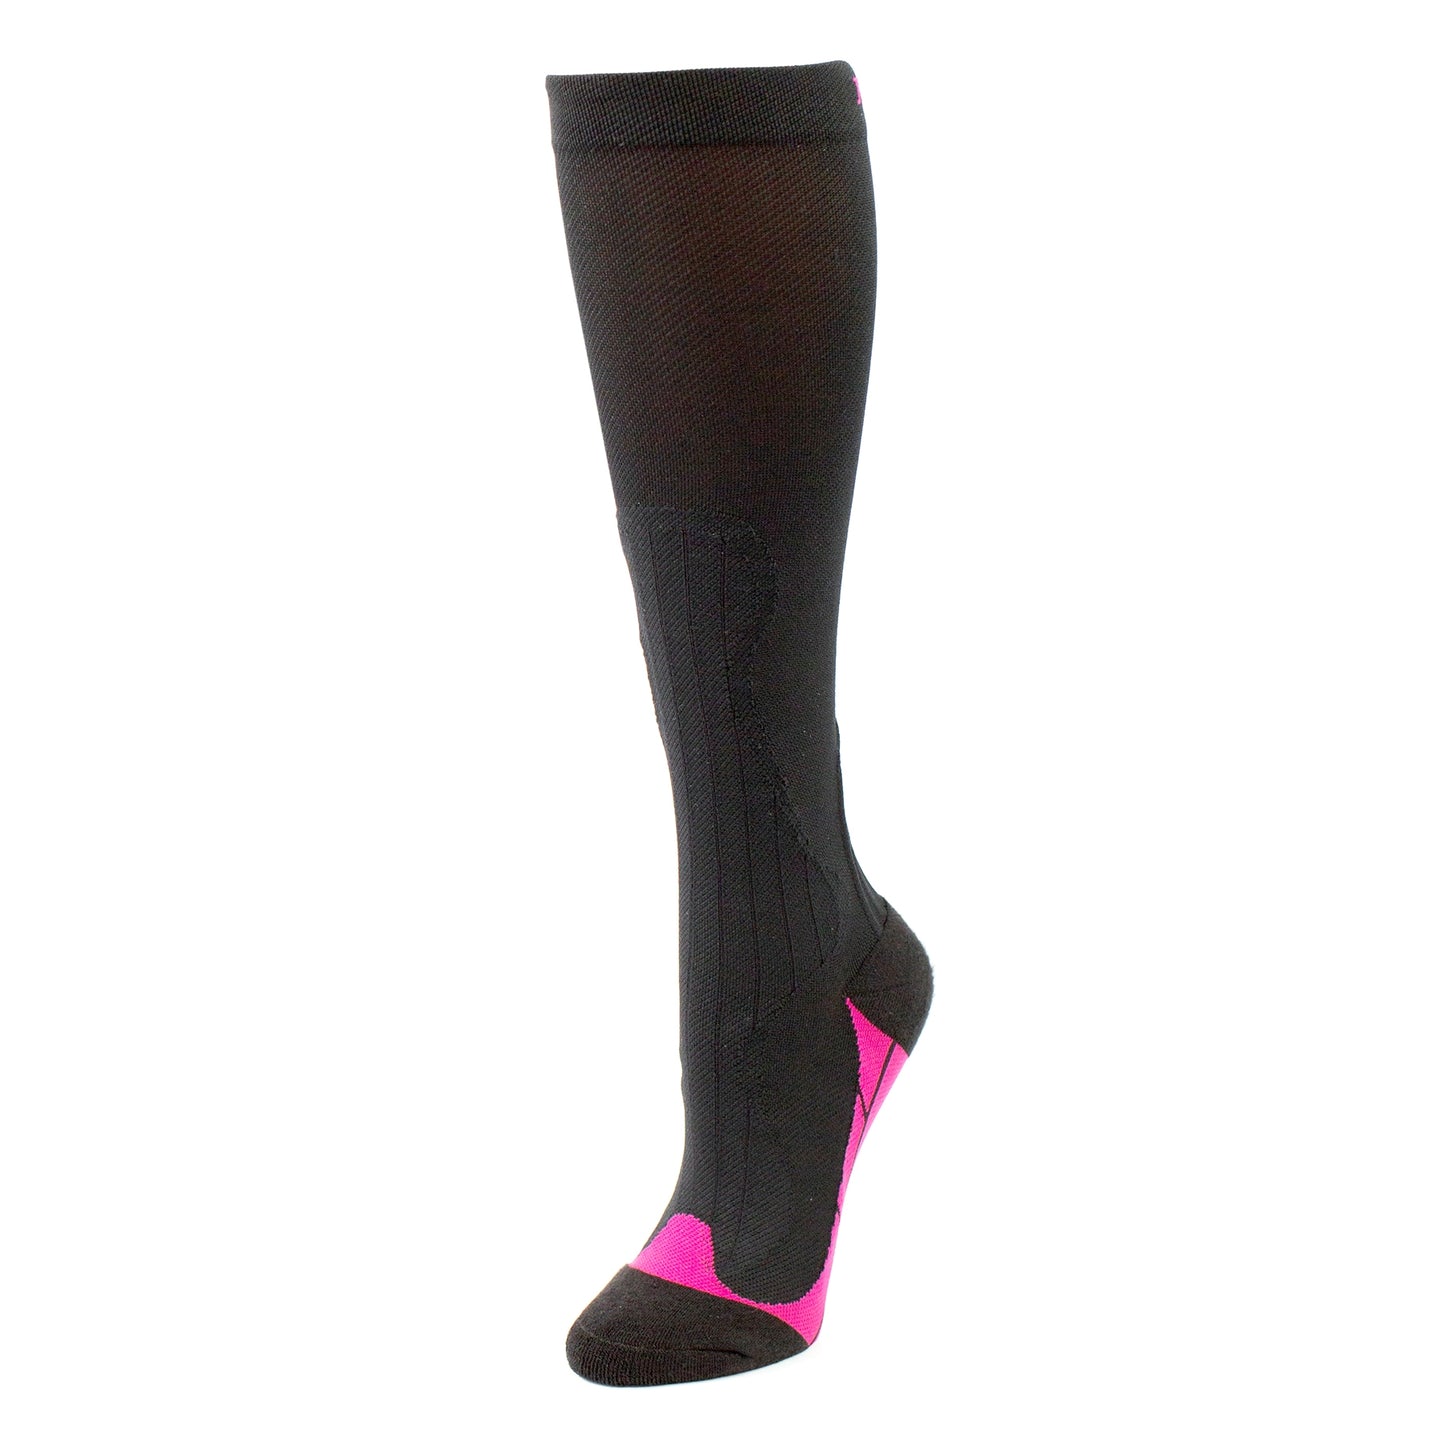 Men's Powerstep G2 Compression Socks - The Ultimate Foot Store